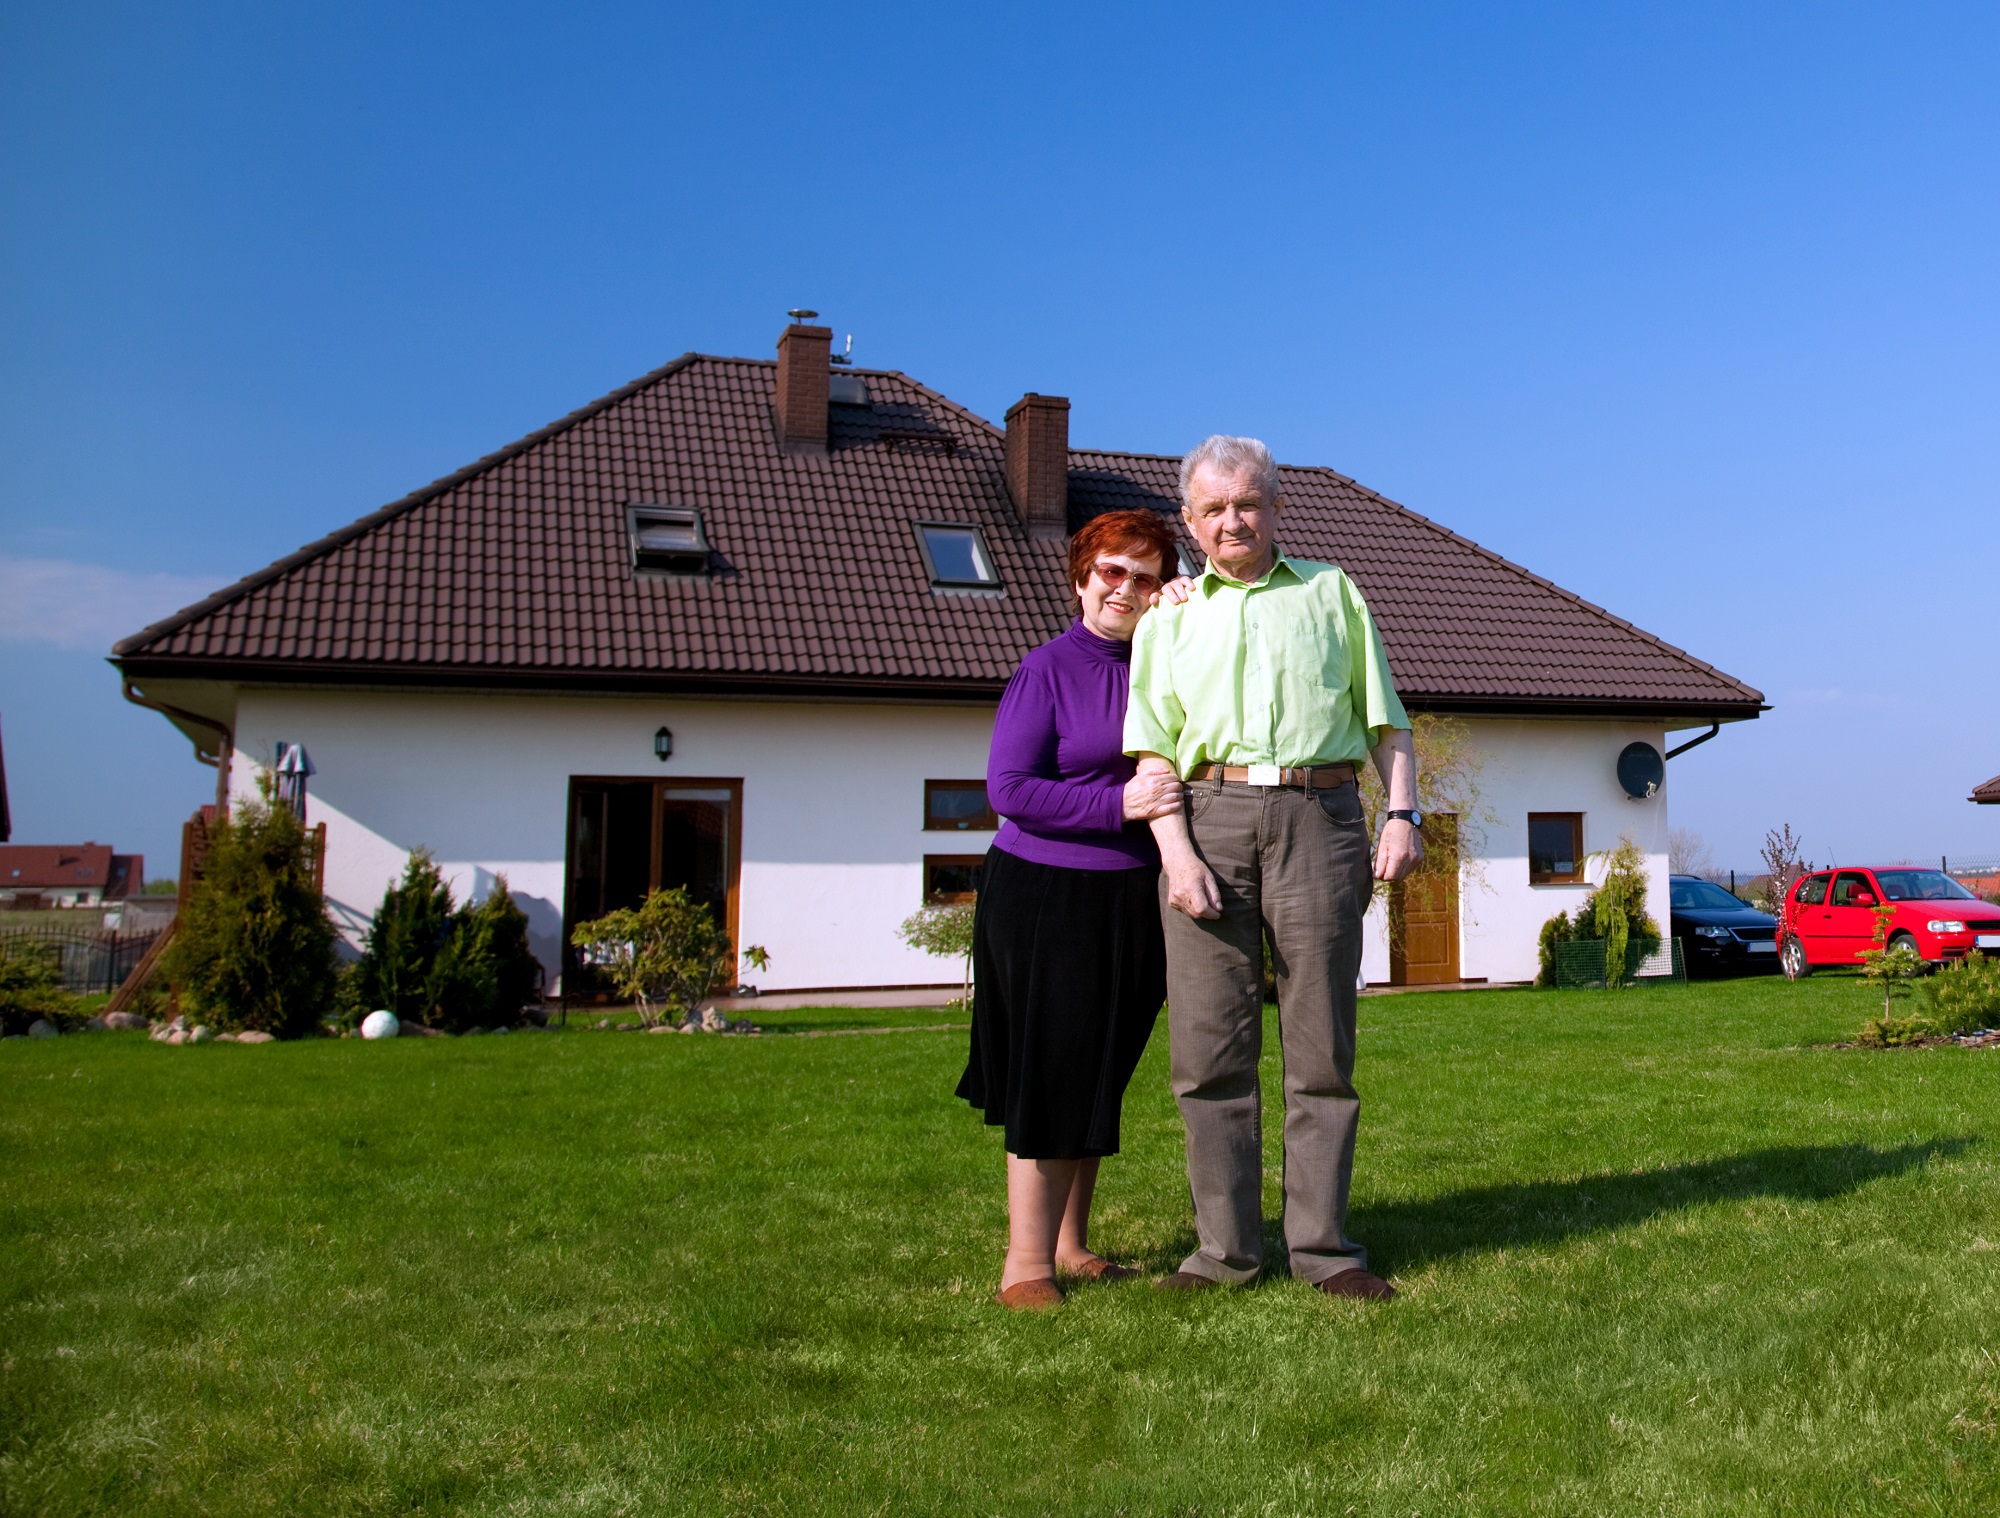 An older couple standing in front of their home